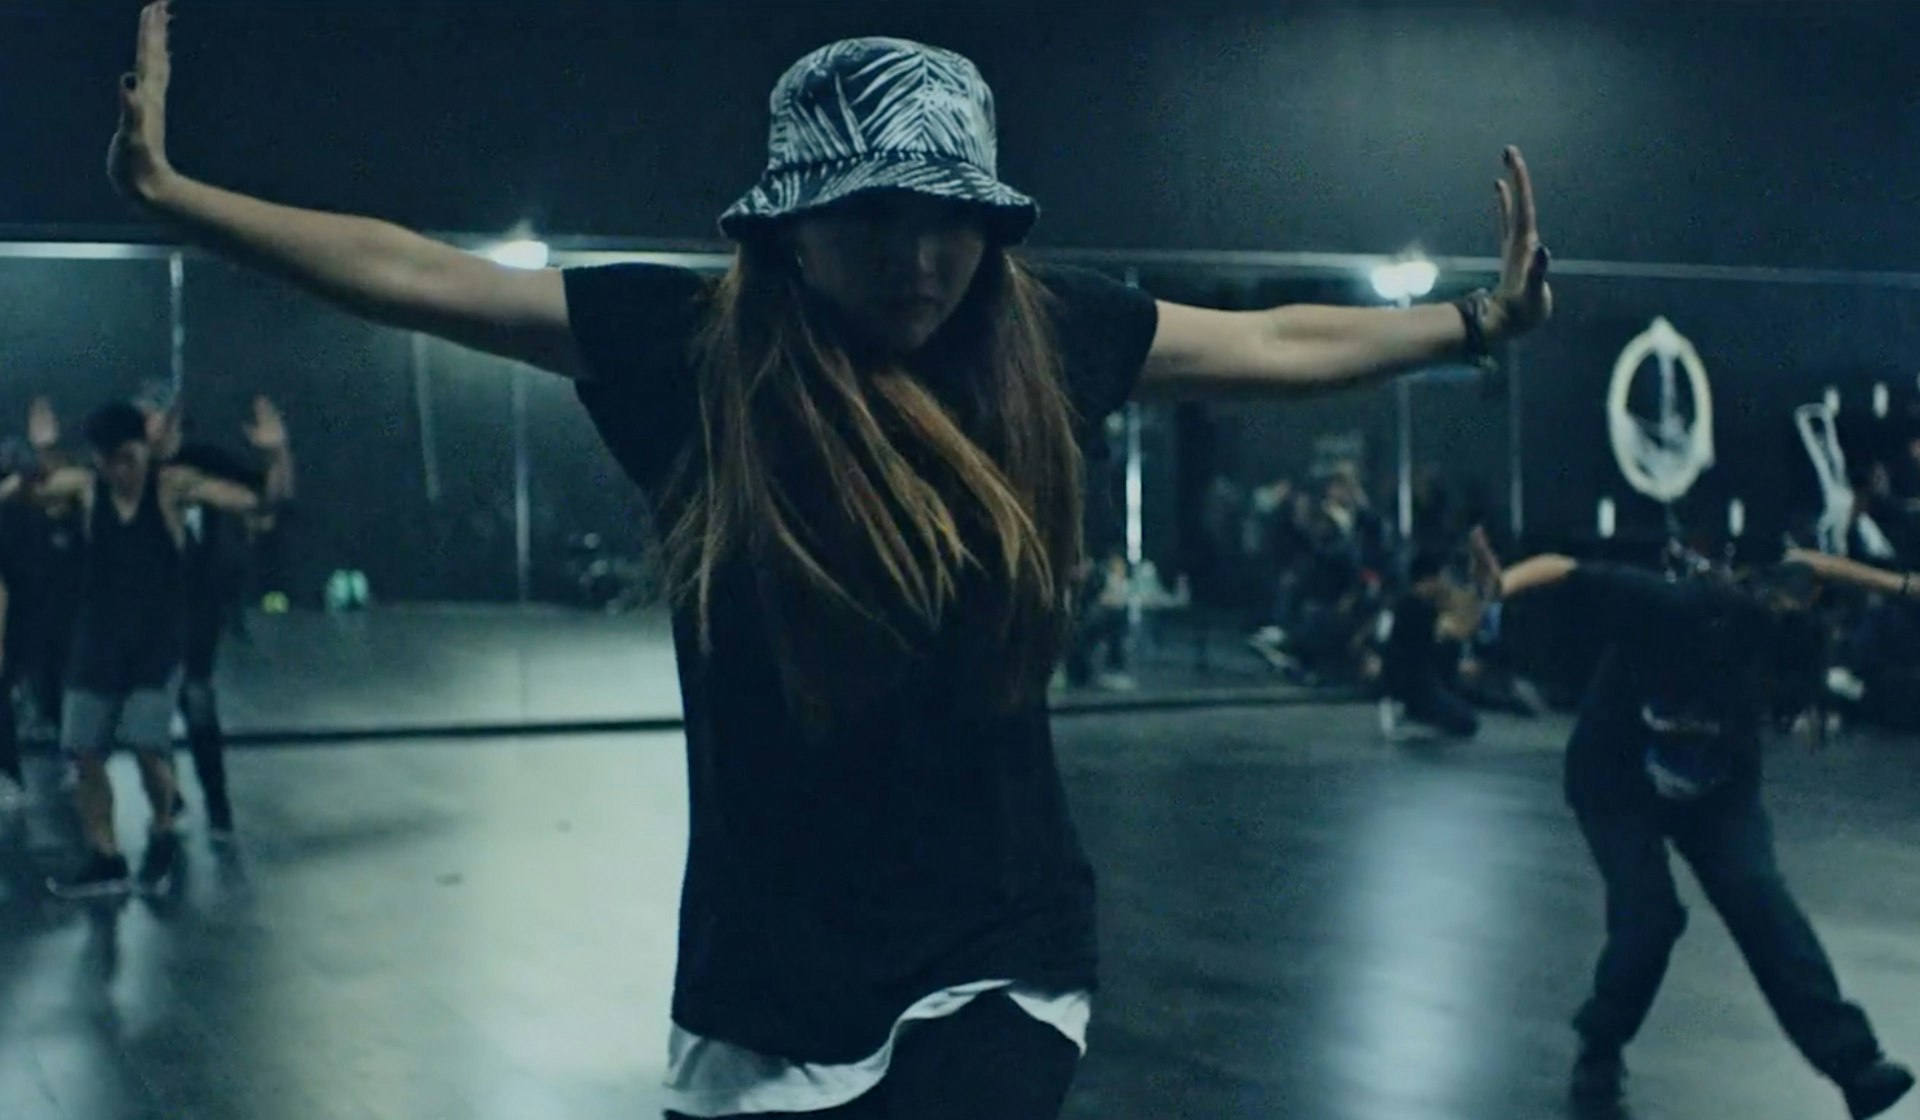 Video: Japanese dancers chase the hip hop dream in LA